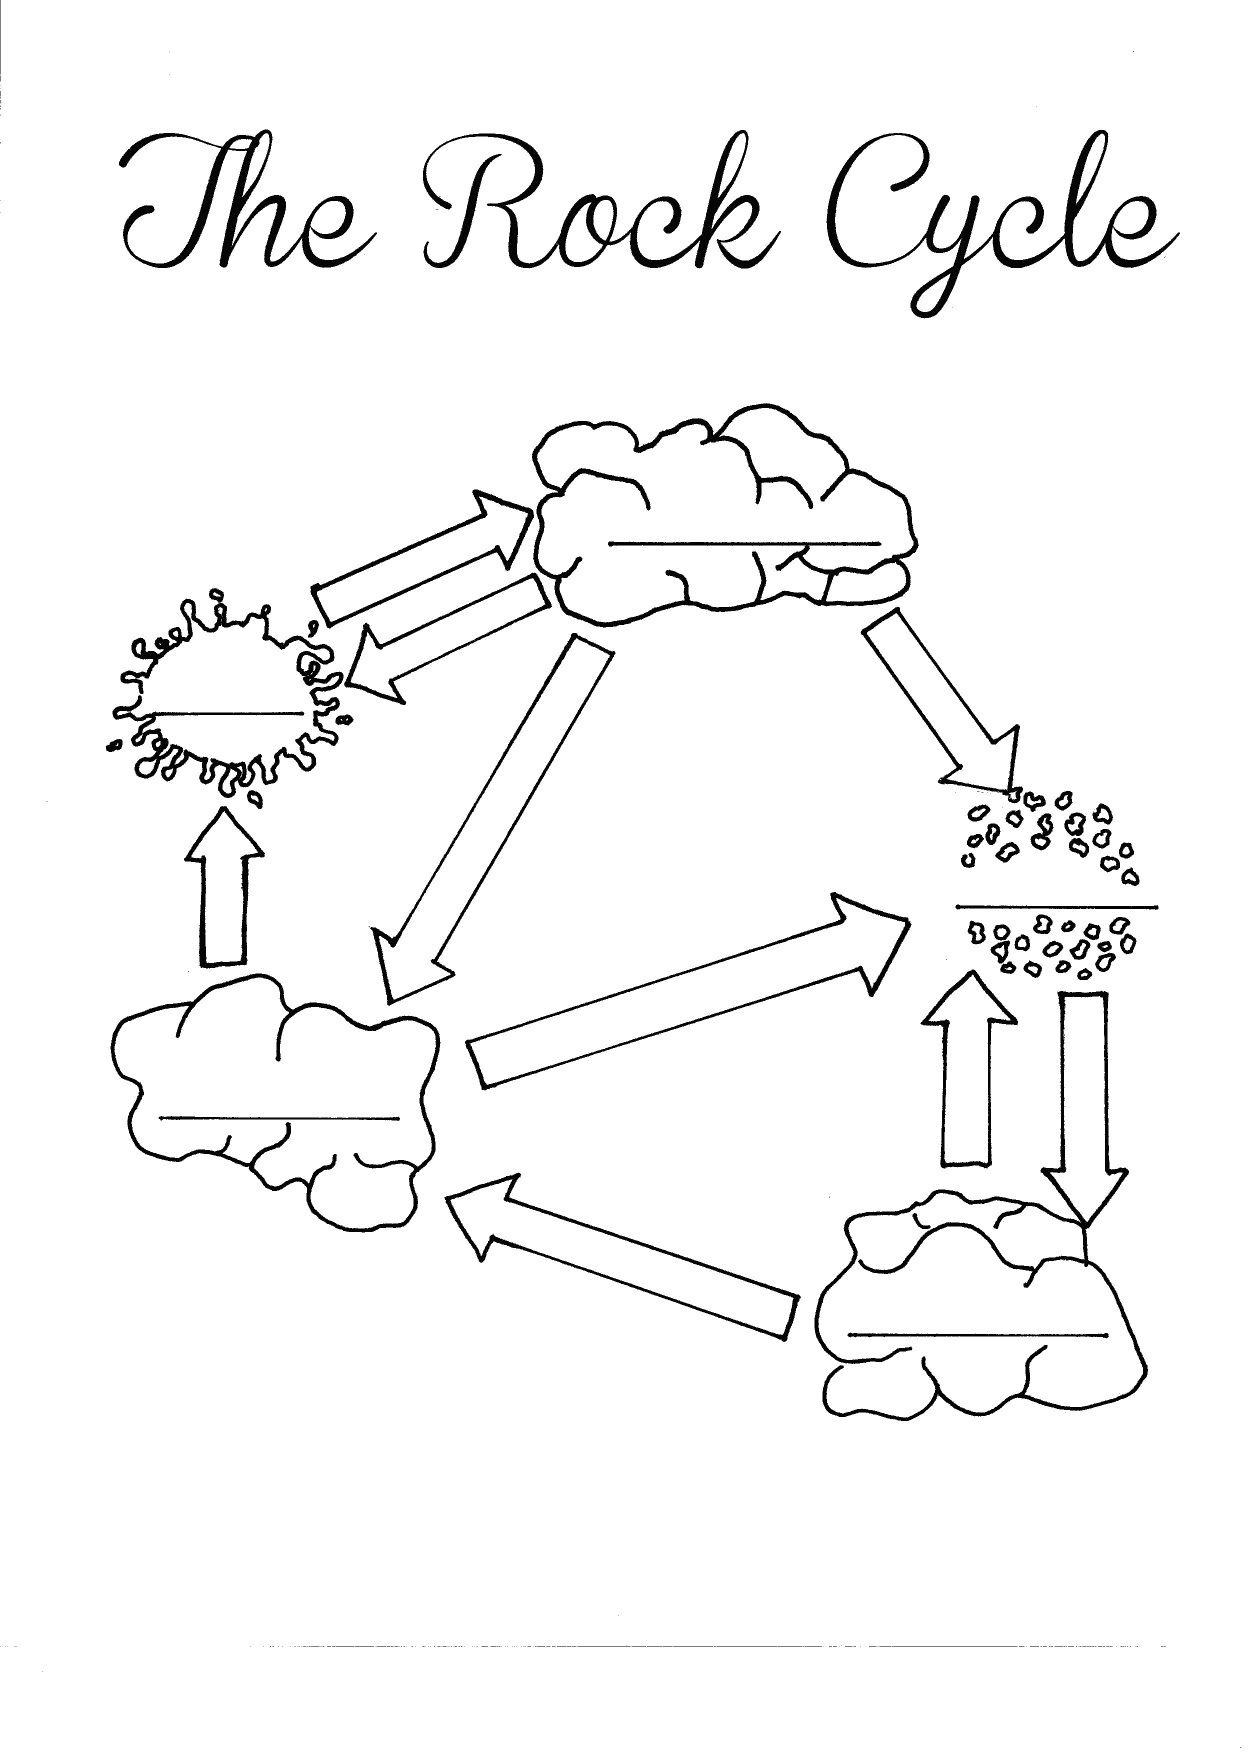 The Rock Cycle Blank Worksheet - Fill In As You Talk About Or Go - Rock Cycle Worksheets Free Printable